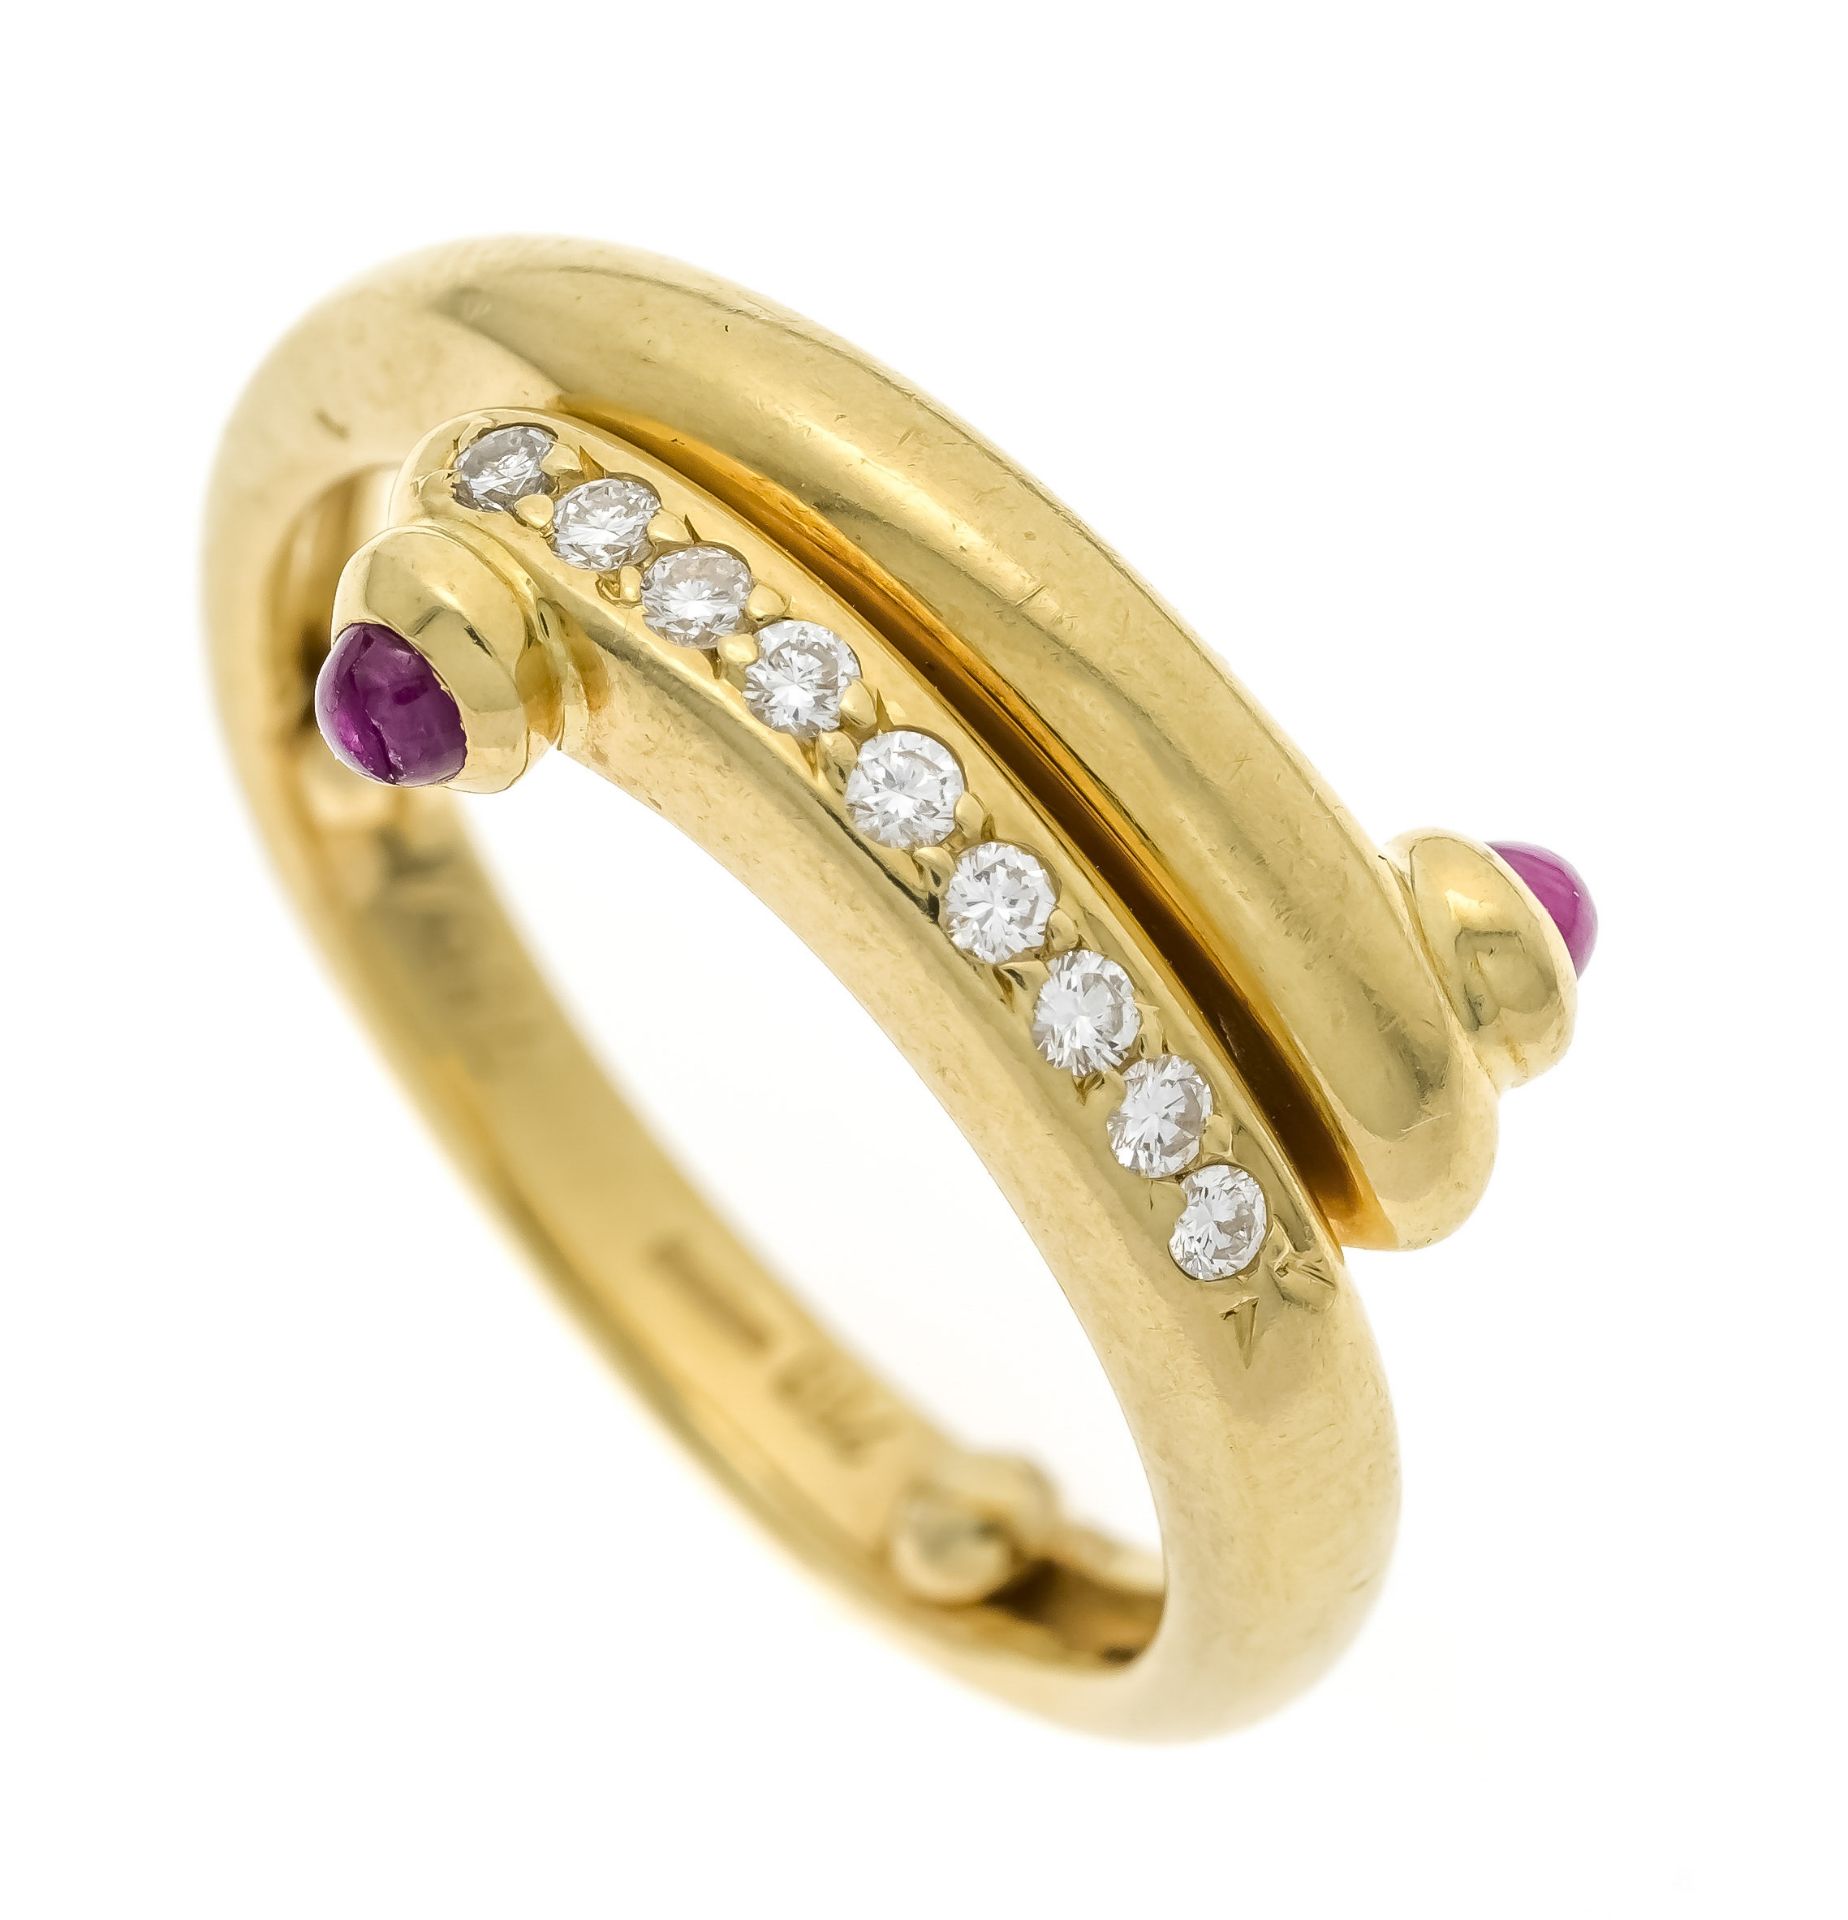 Wempe ruby-brilliant ring GG 750/000 with 2 round ruby cabochons 2.2 mm red, opaque, slightly